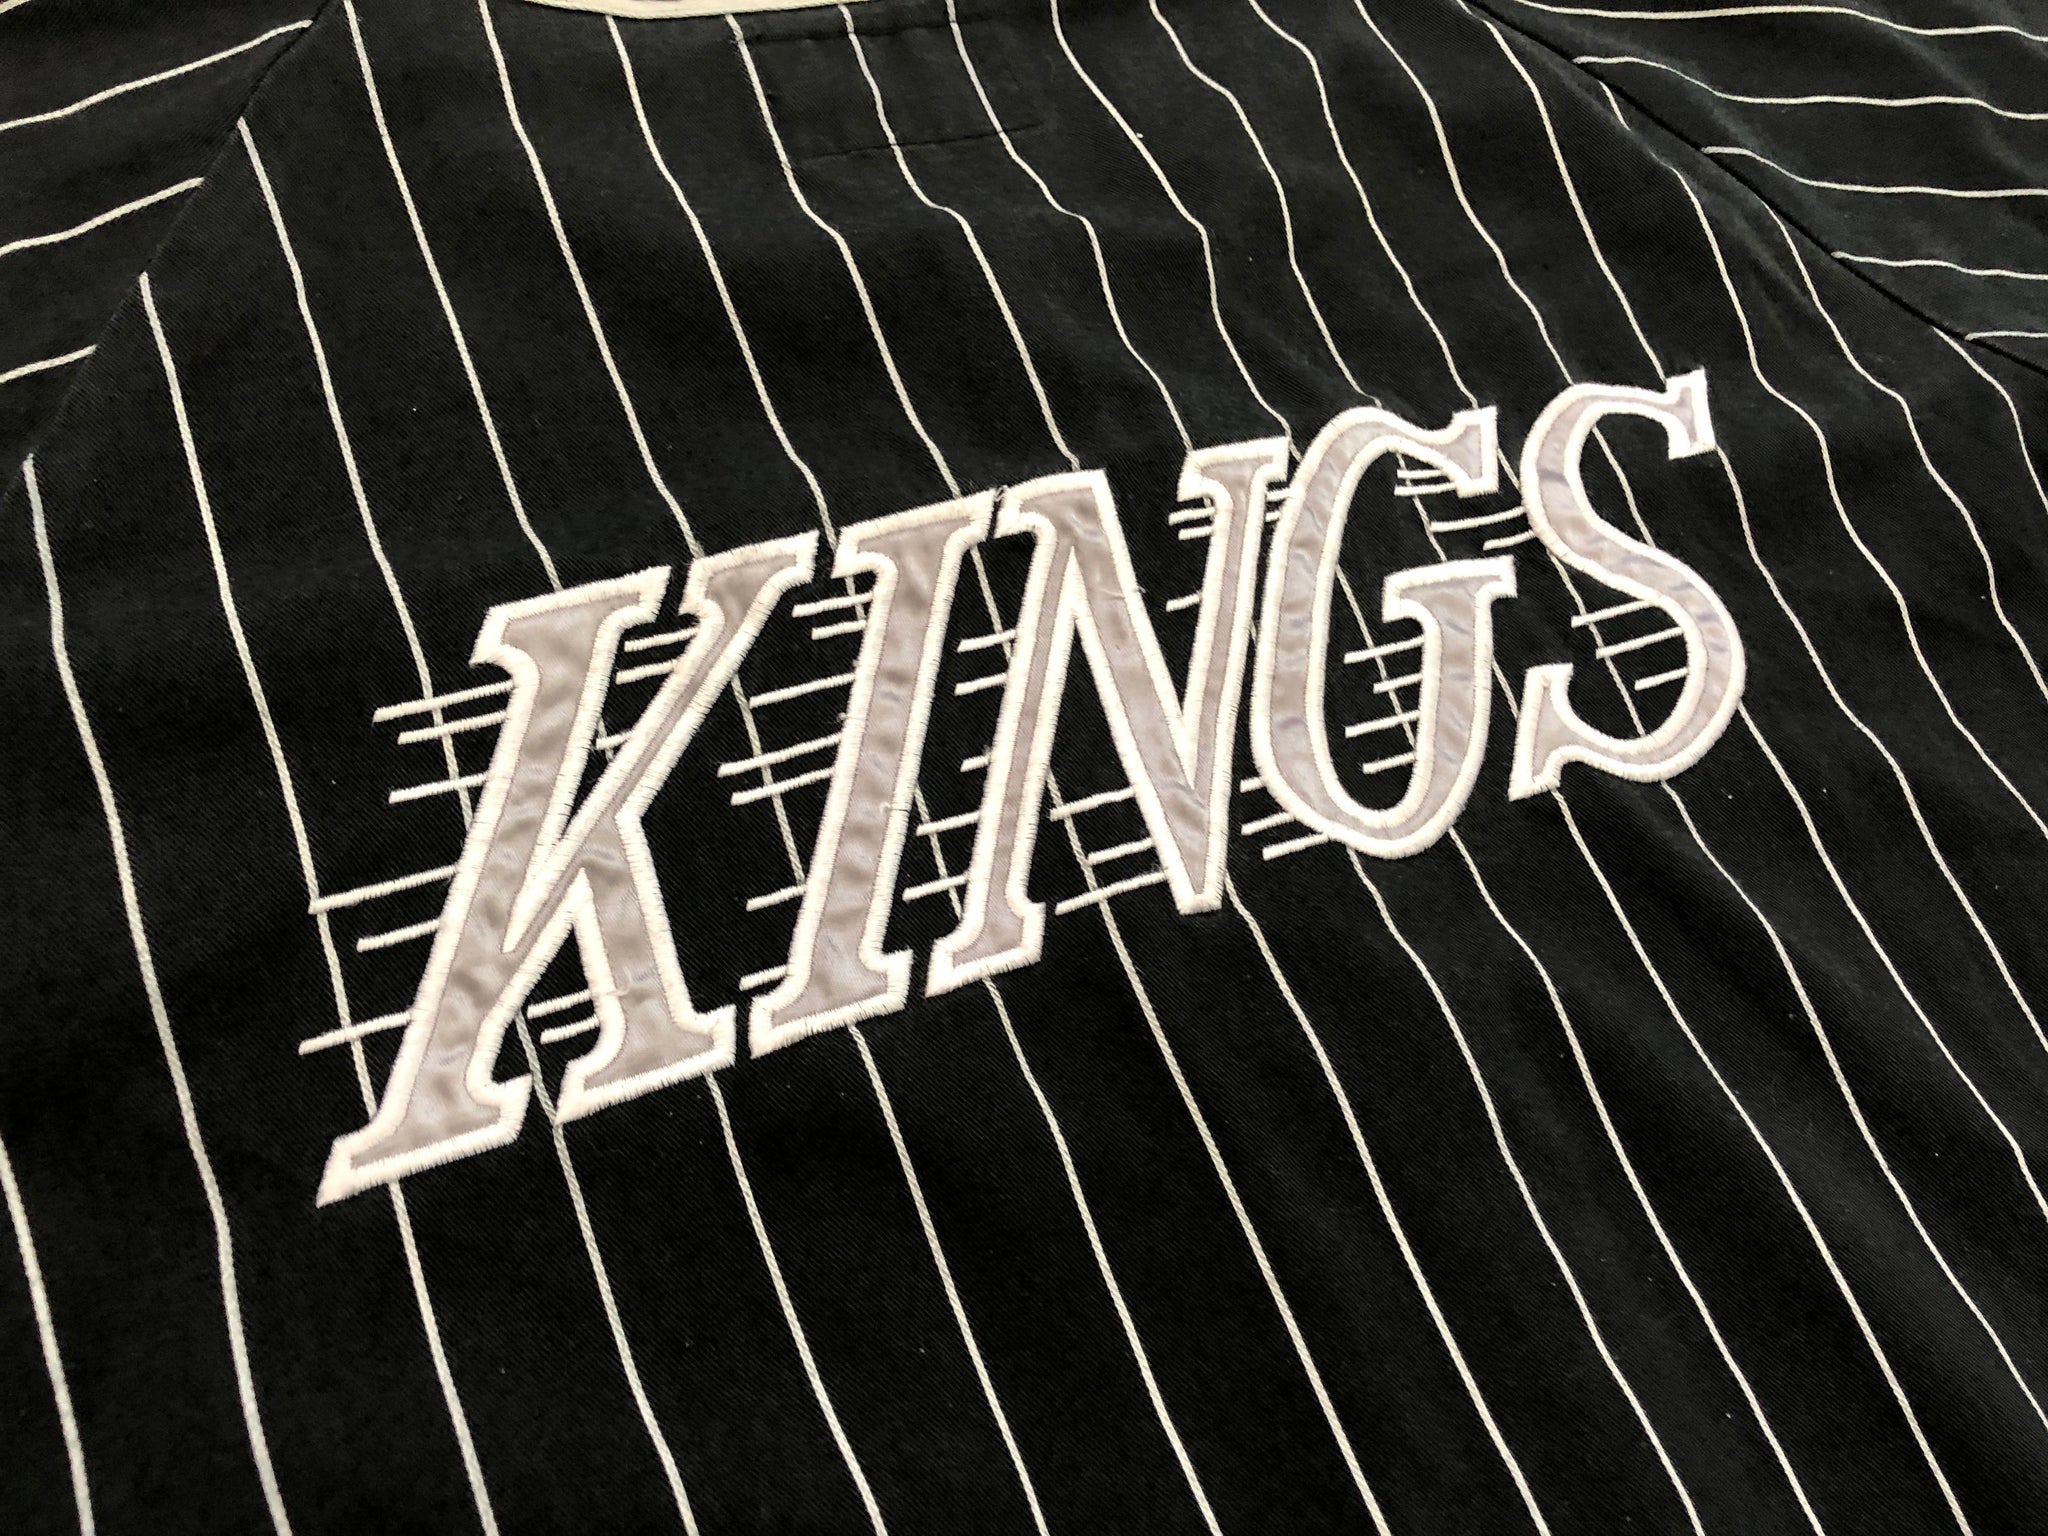 Vintage Los Angeles Kings Pin Stripe Starter Jersey, Size Large – Stuck In  The 90s Sports